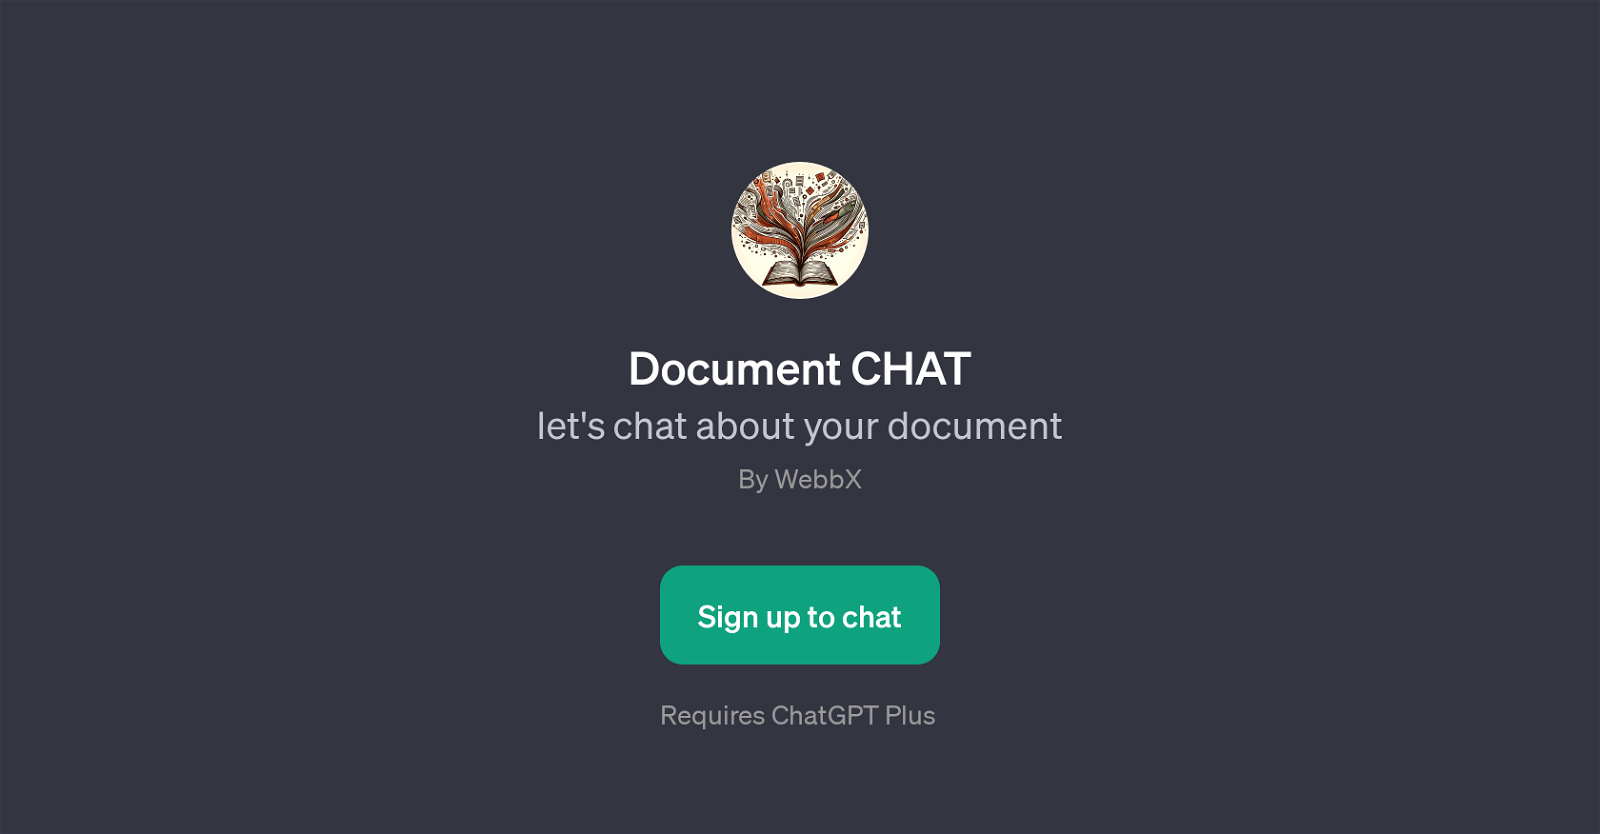 Document CHAT website